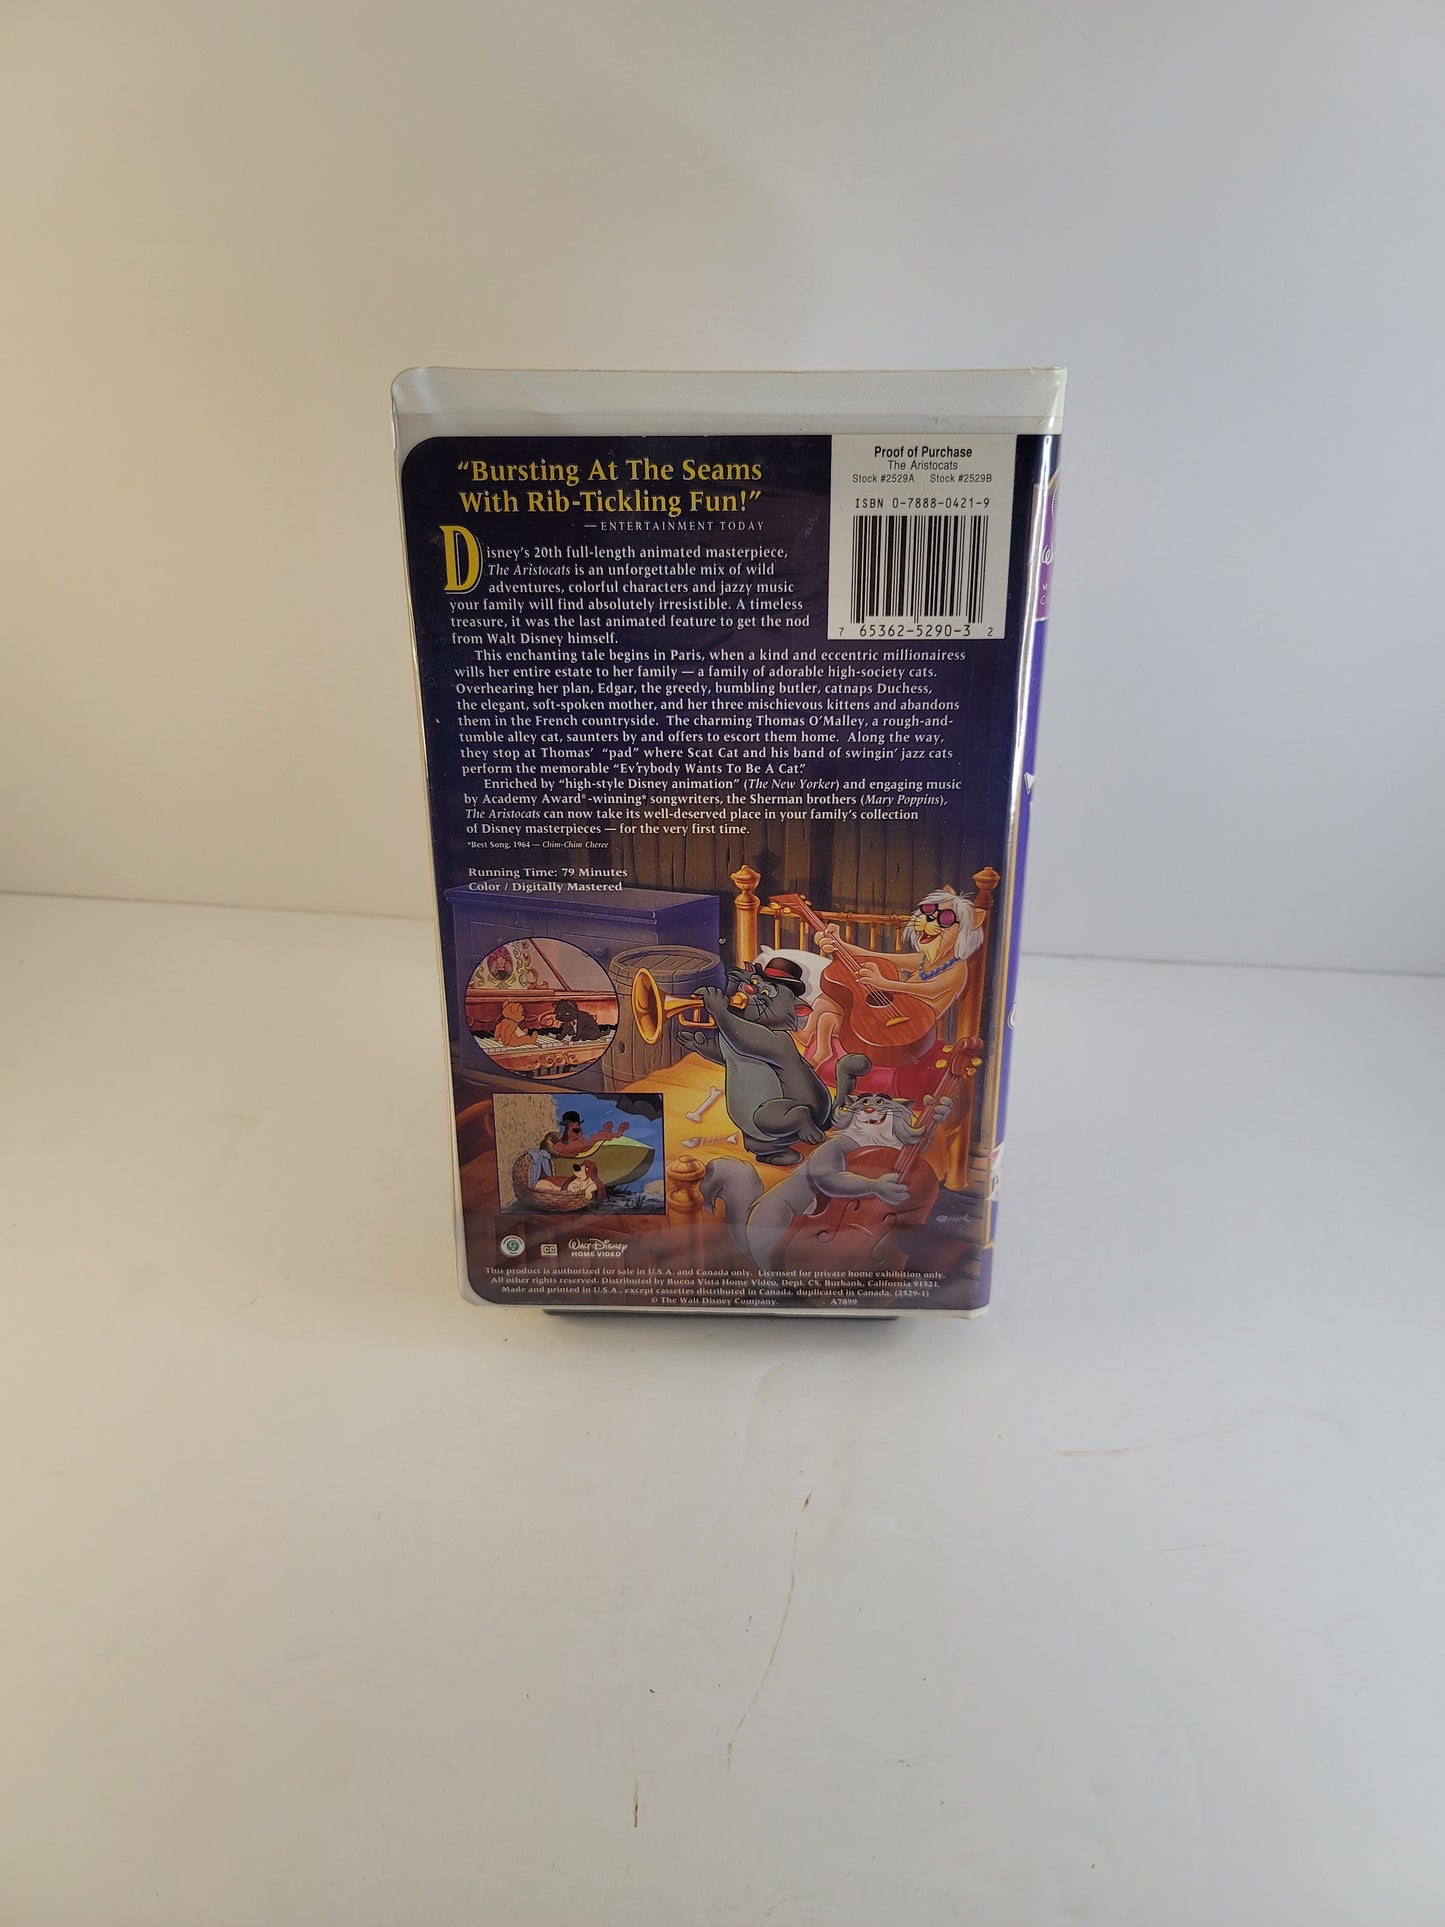 The Aristocats (VHS, 1996)